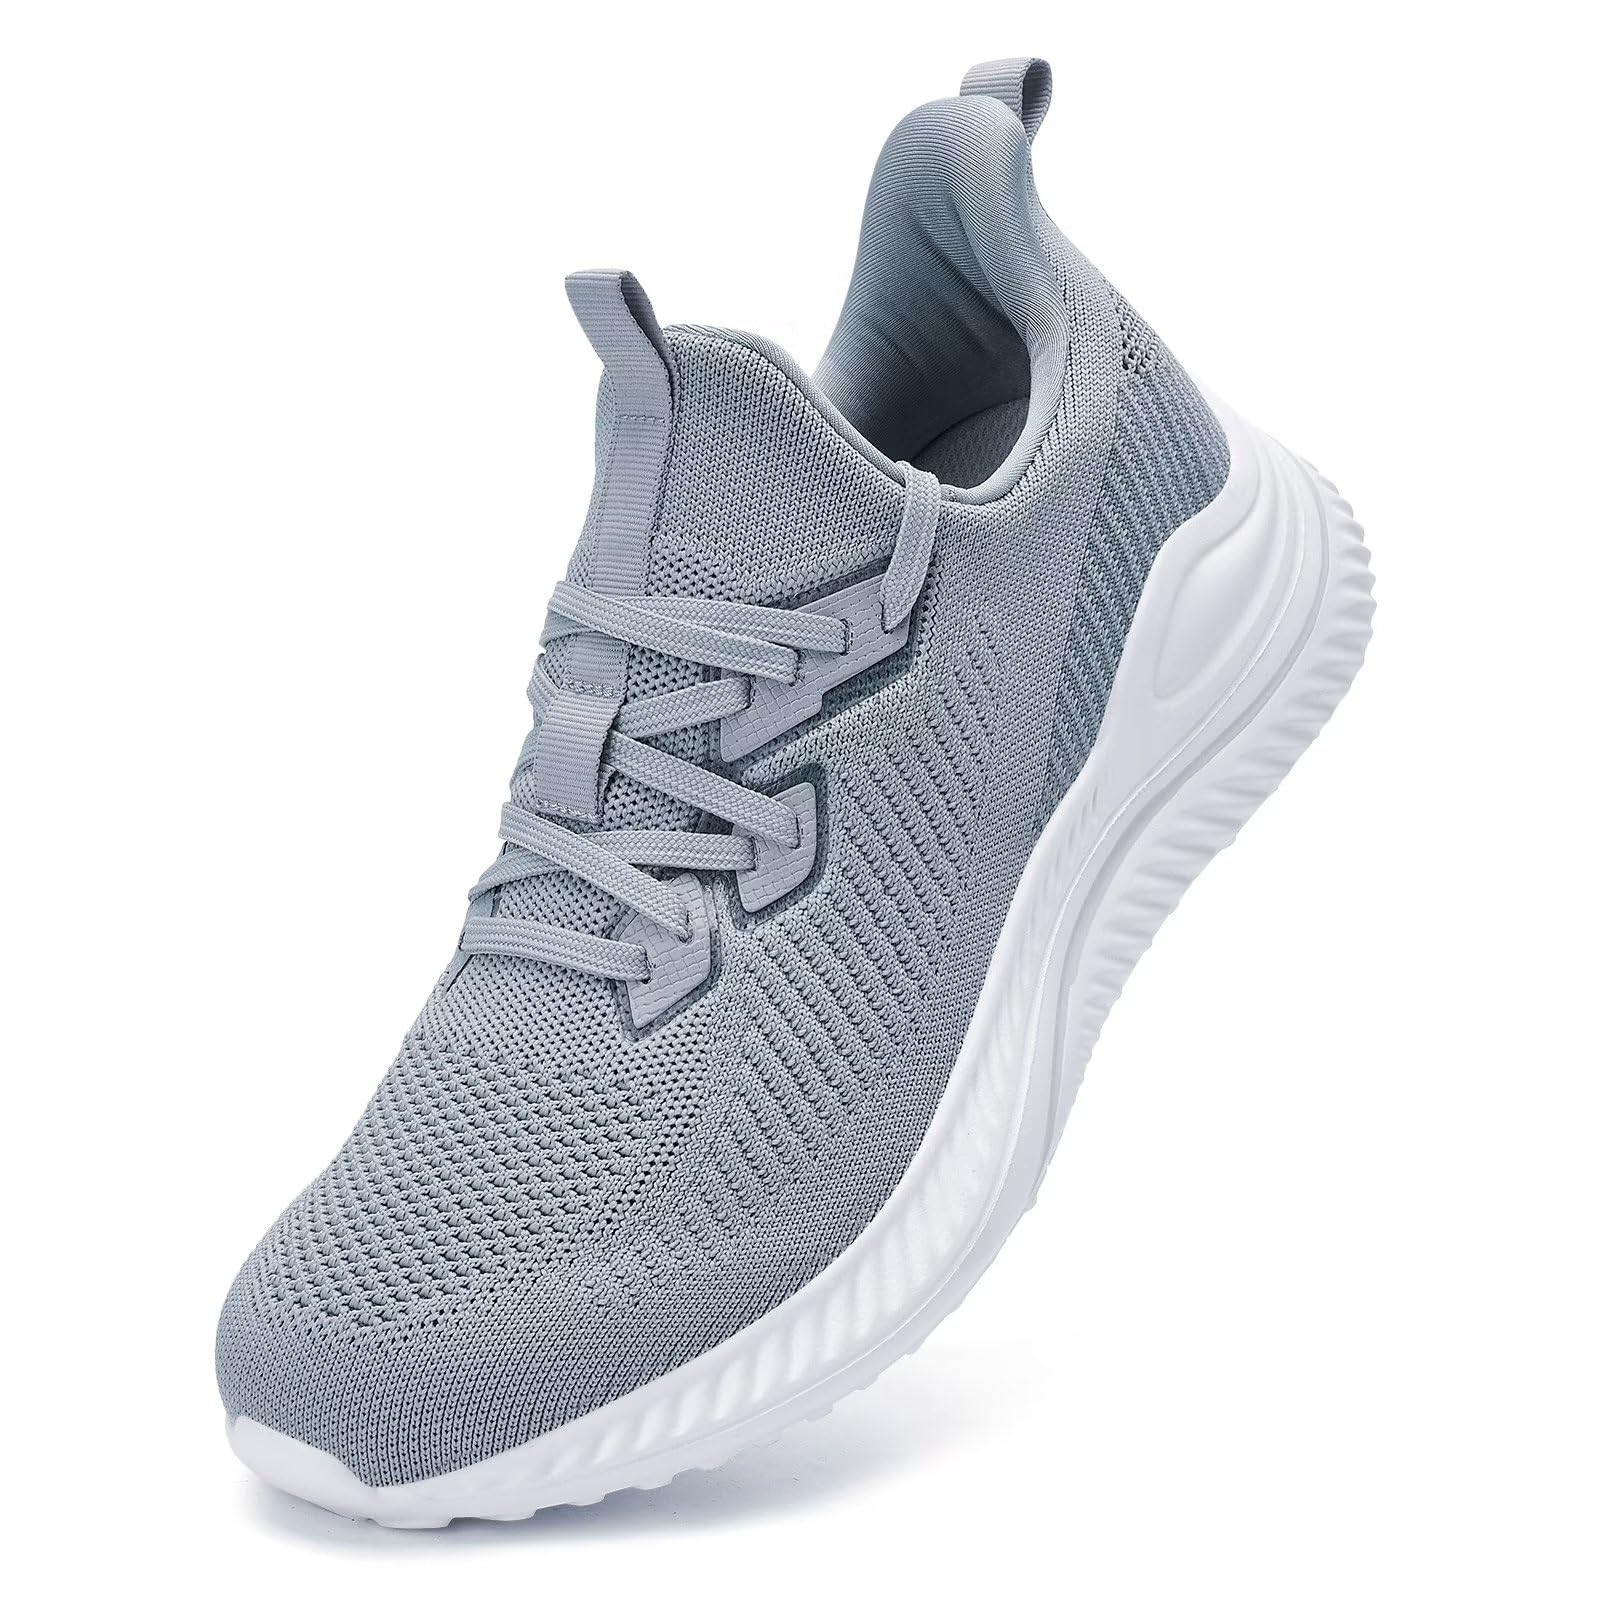 Akk Mens Wide Width Walking Shoes Running Sneakers - Tennis Shoes Breathable Workout Athletic Gym Shoes Comfortable Lightweight Indoor Outdoor Casual Sneakers Silvery Grey Size 10.5